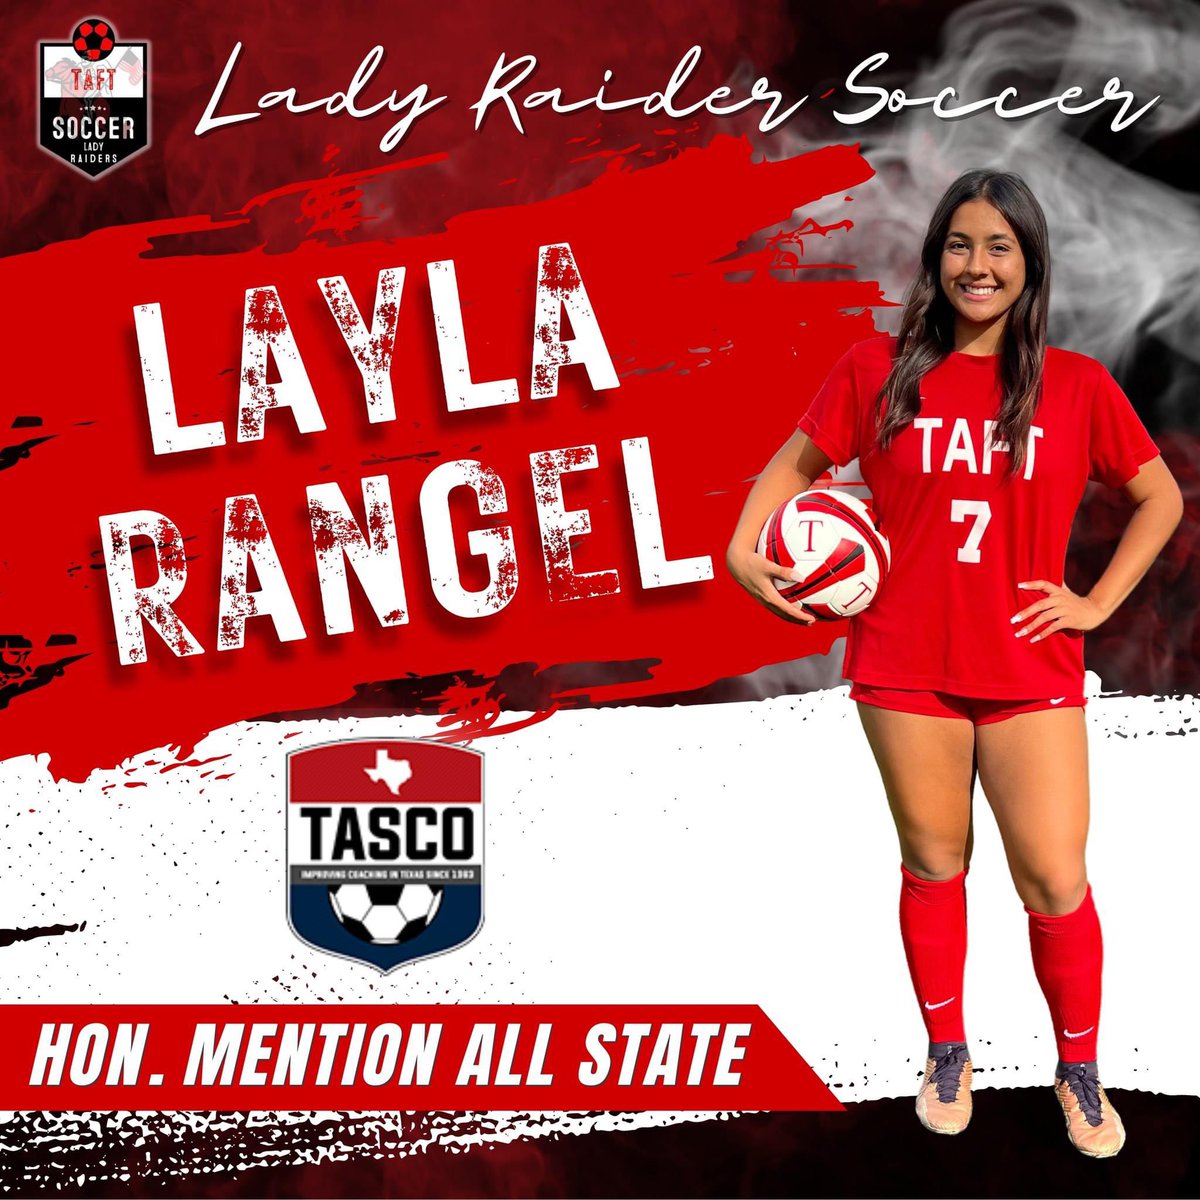 So grateful to be named Honorable Mention All-State! Thank you @tascosoccer for the recognization and my @taft_soccer coaches and teammates for supporting me ❤️ @UTDwomenssoccer